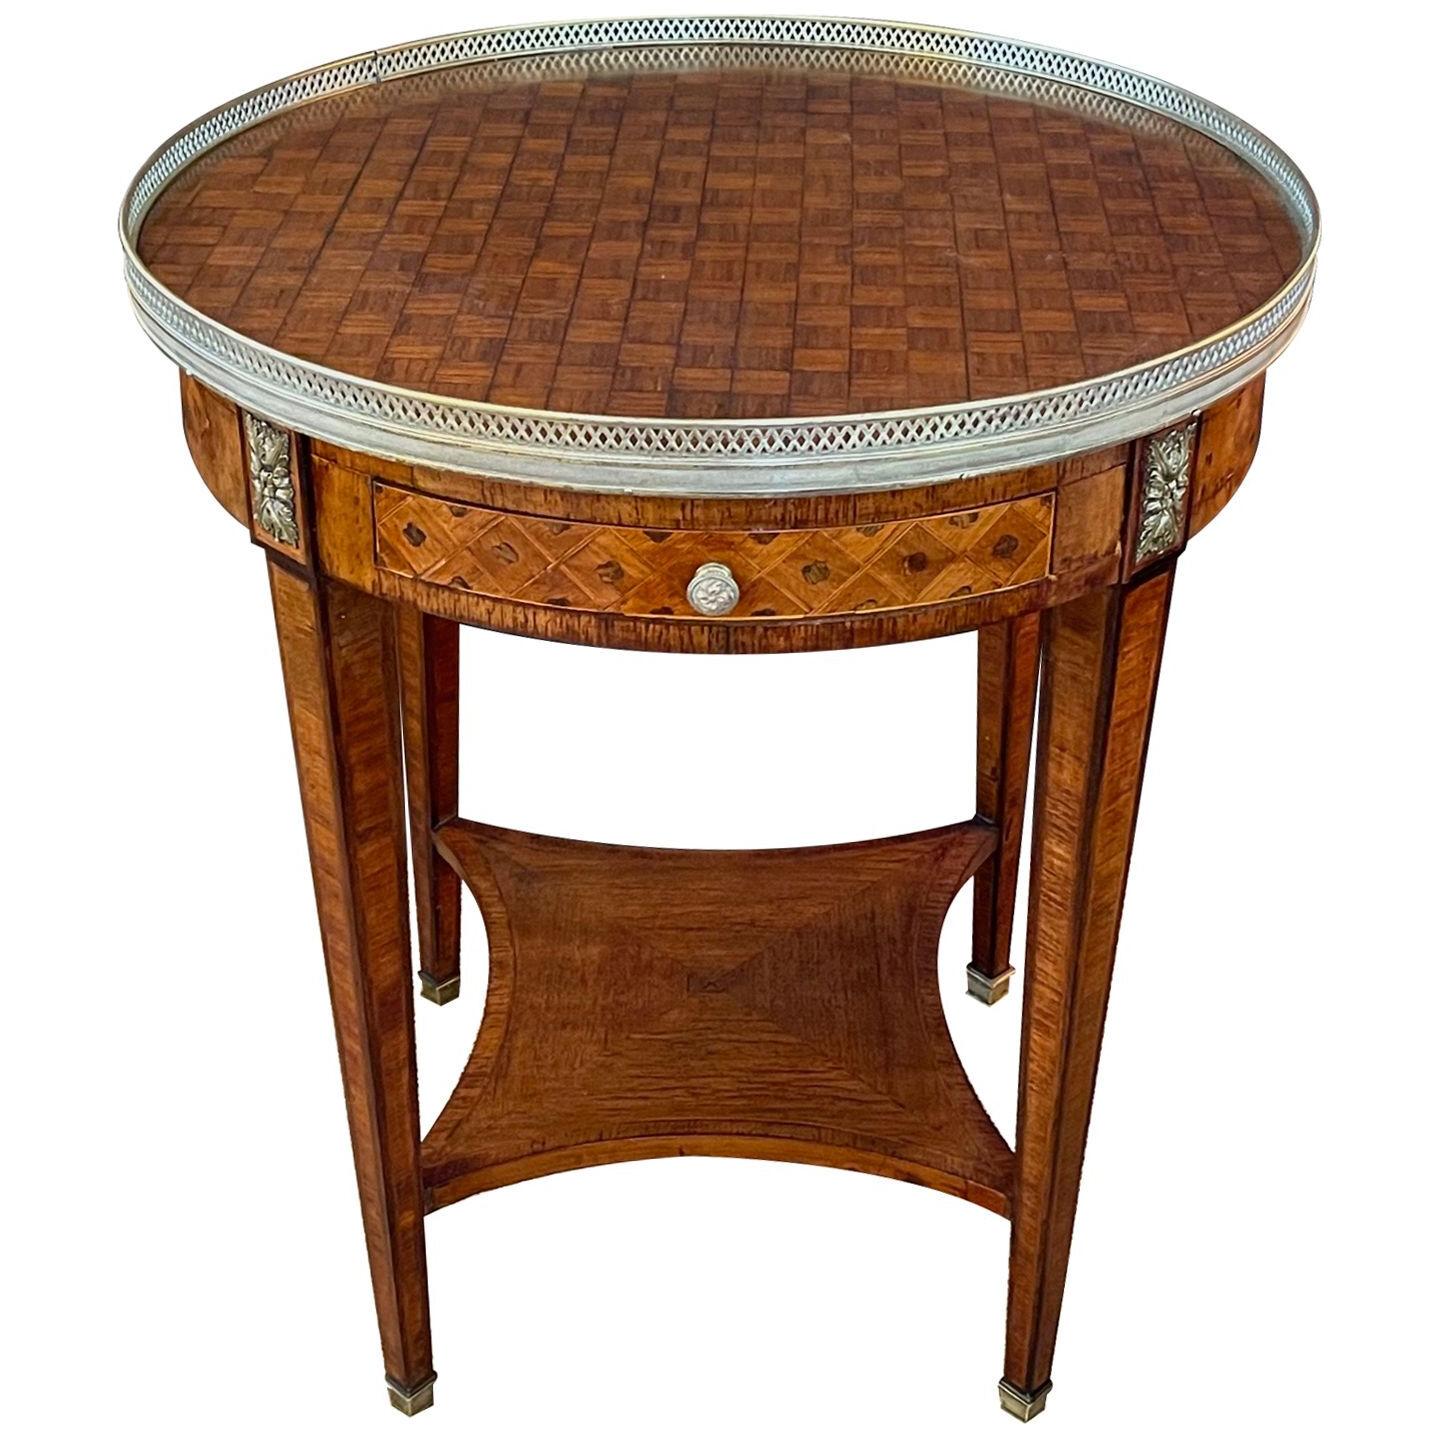 French Louis XVI style marquetry inlaid circular side table/gueridon